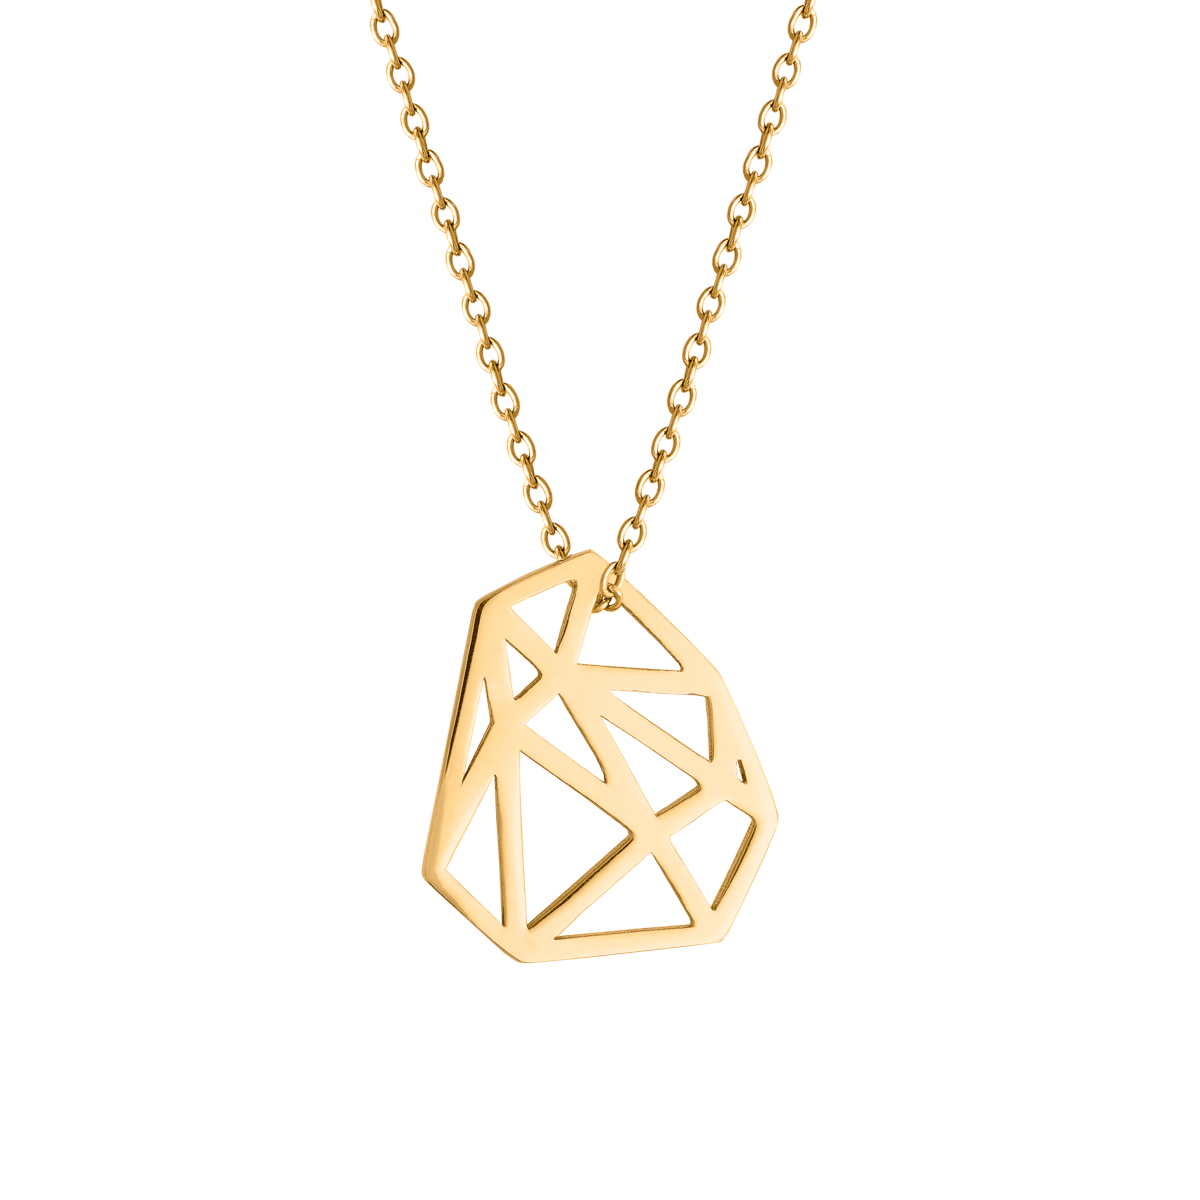 Necklace with openwork pendant gold